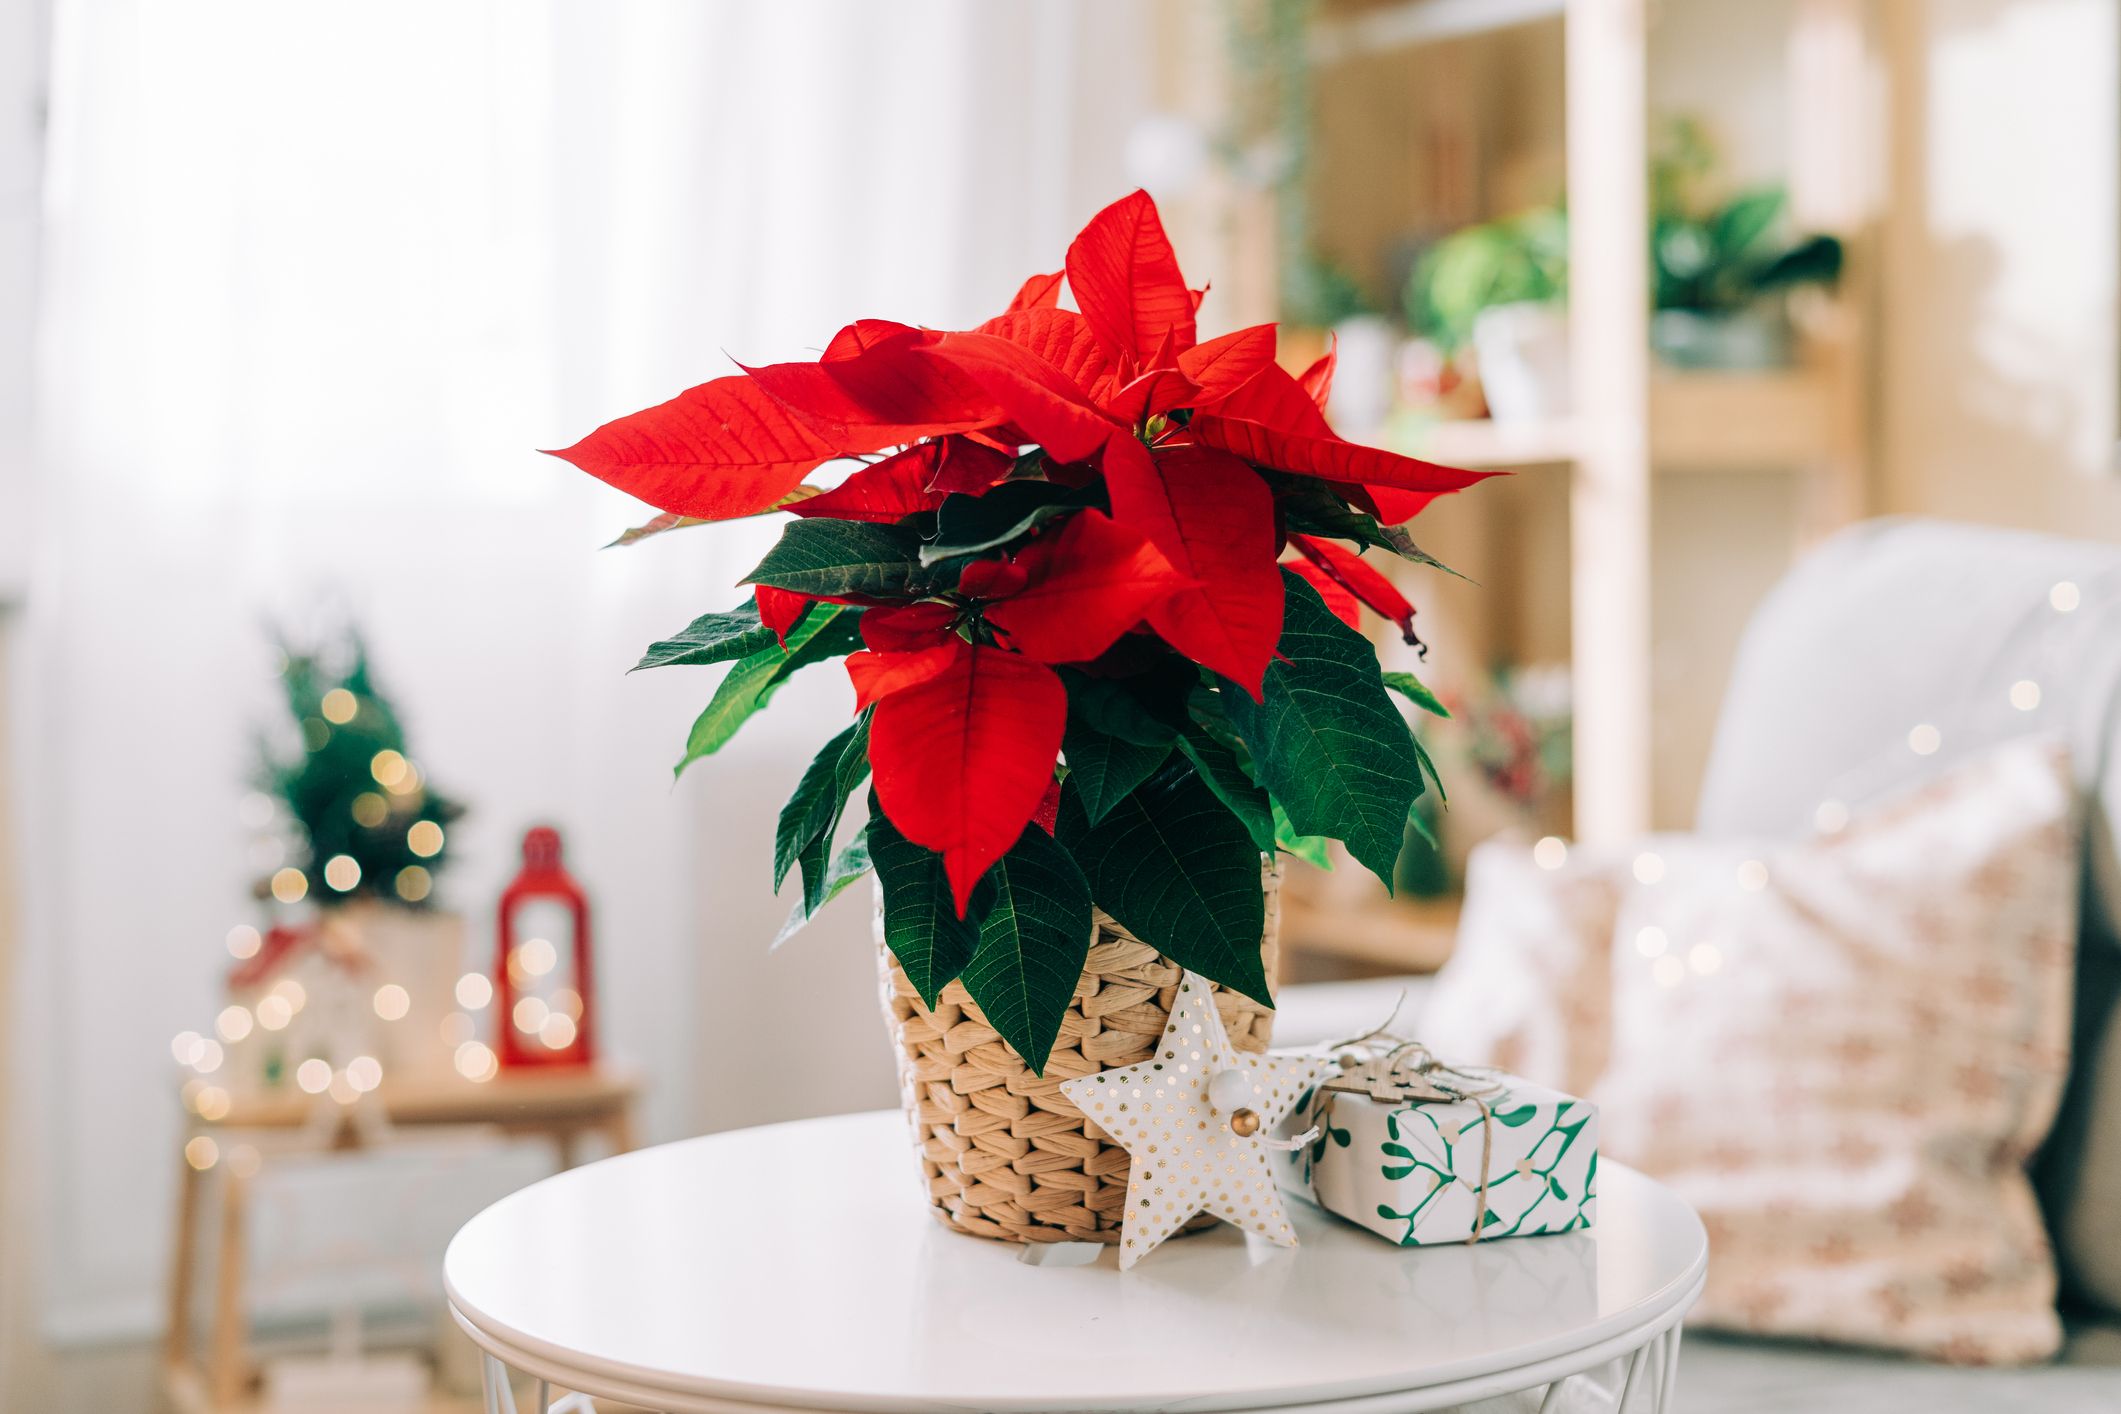 About　Everything　to　Know　Care:　Christmas　Flower　Poinsettia　the